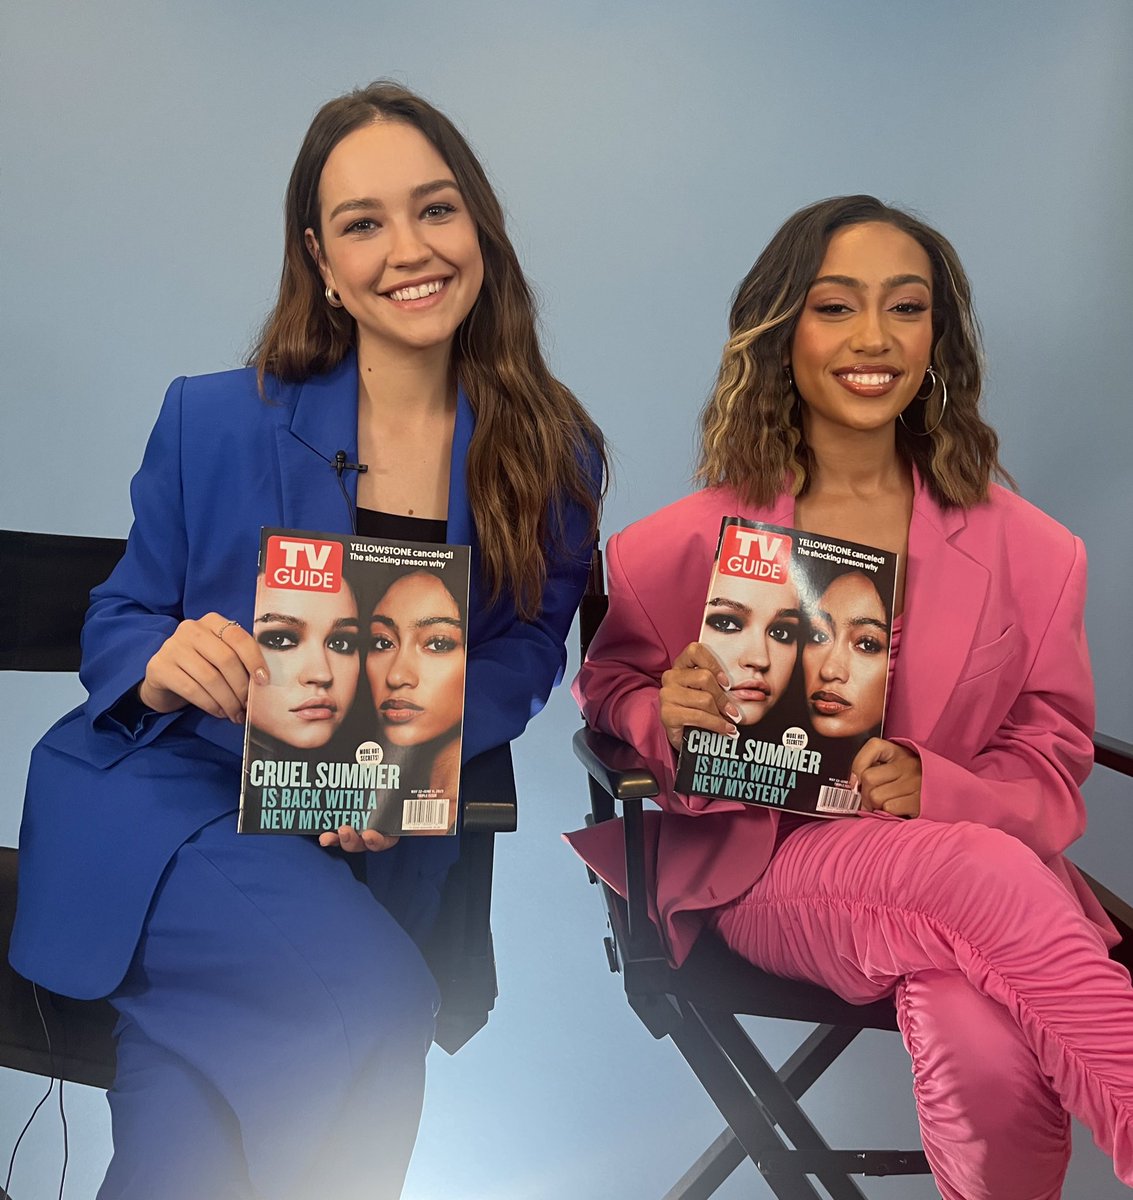 .@cruelsummer stars #SadieStanley and @LexiCUnderwood stopped by to check out their cover! 😍